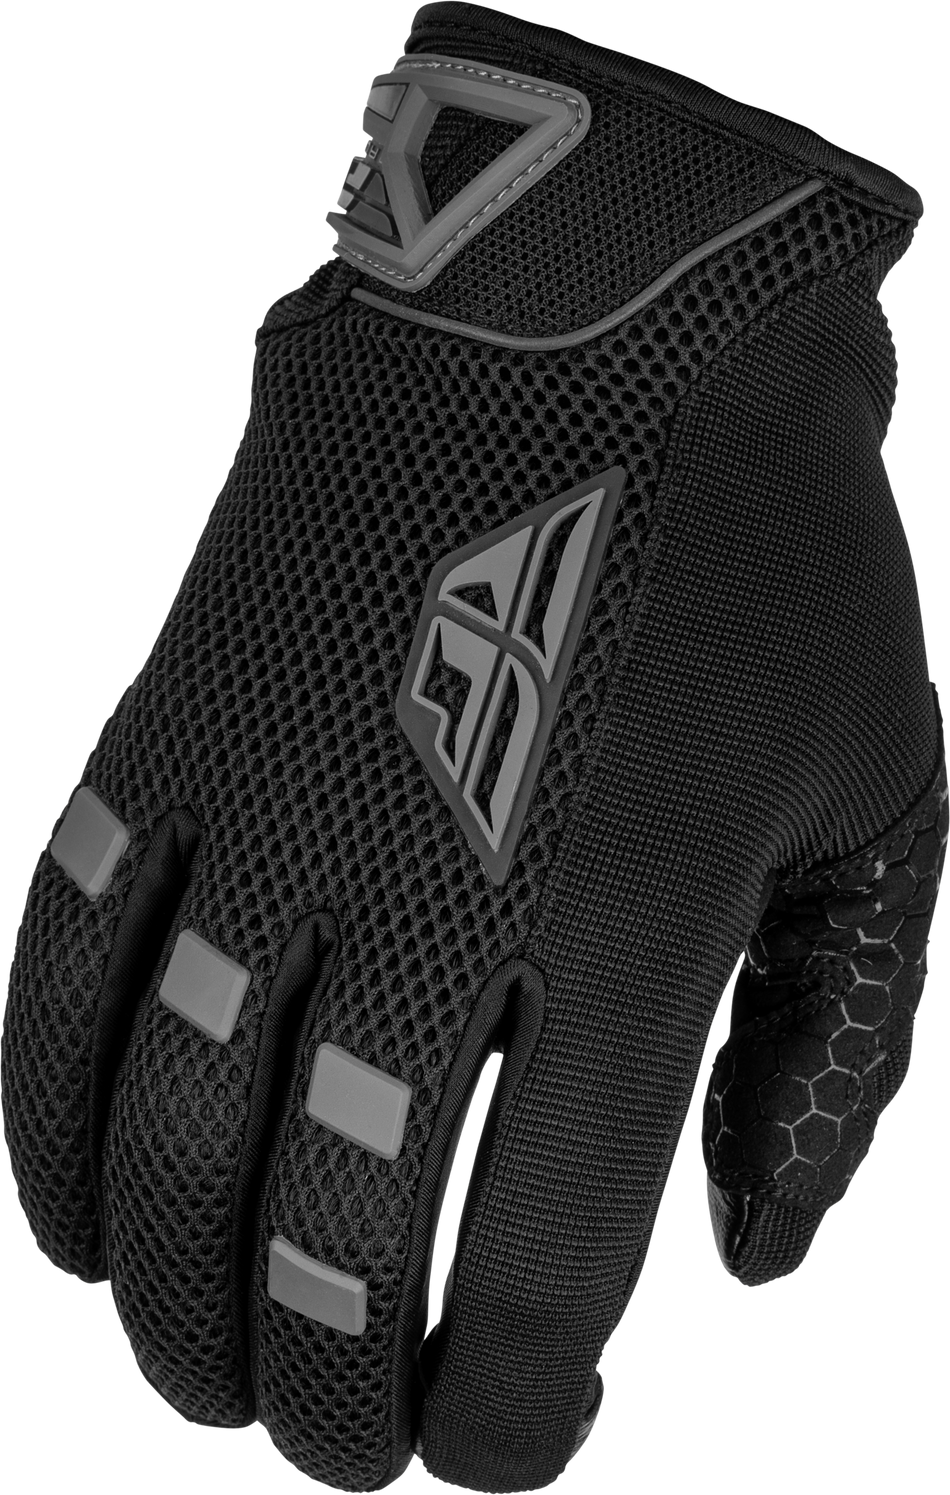 FLY RACING Women's Coolpro Gloves Black Xs 476-6214XS